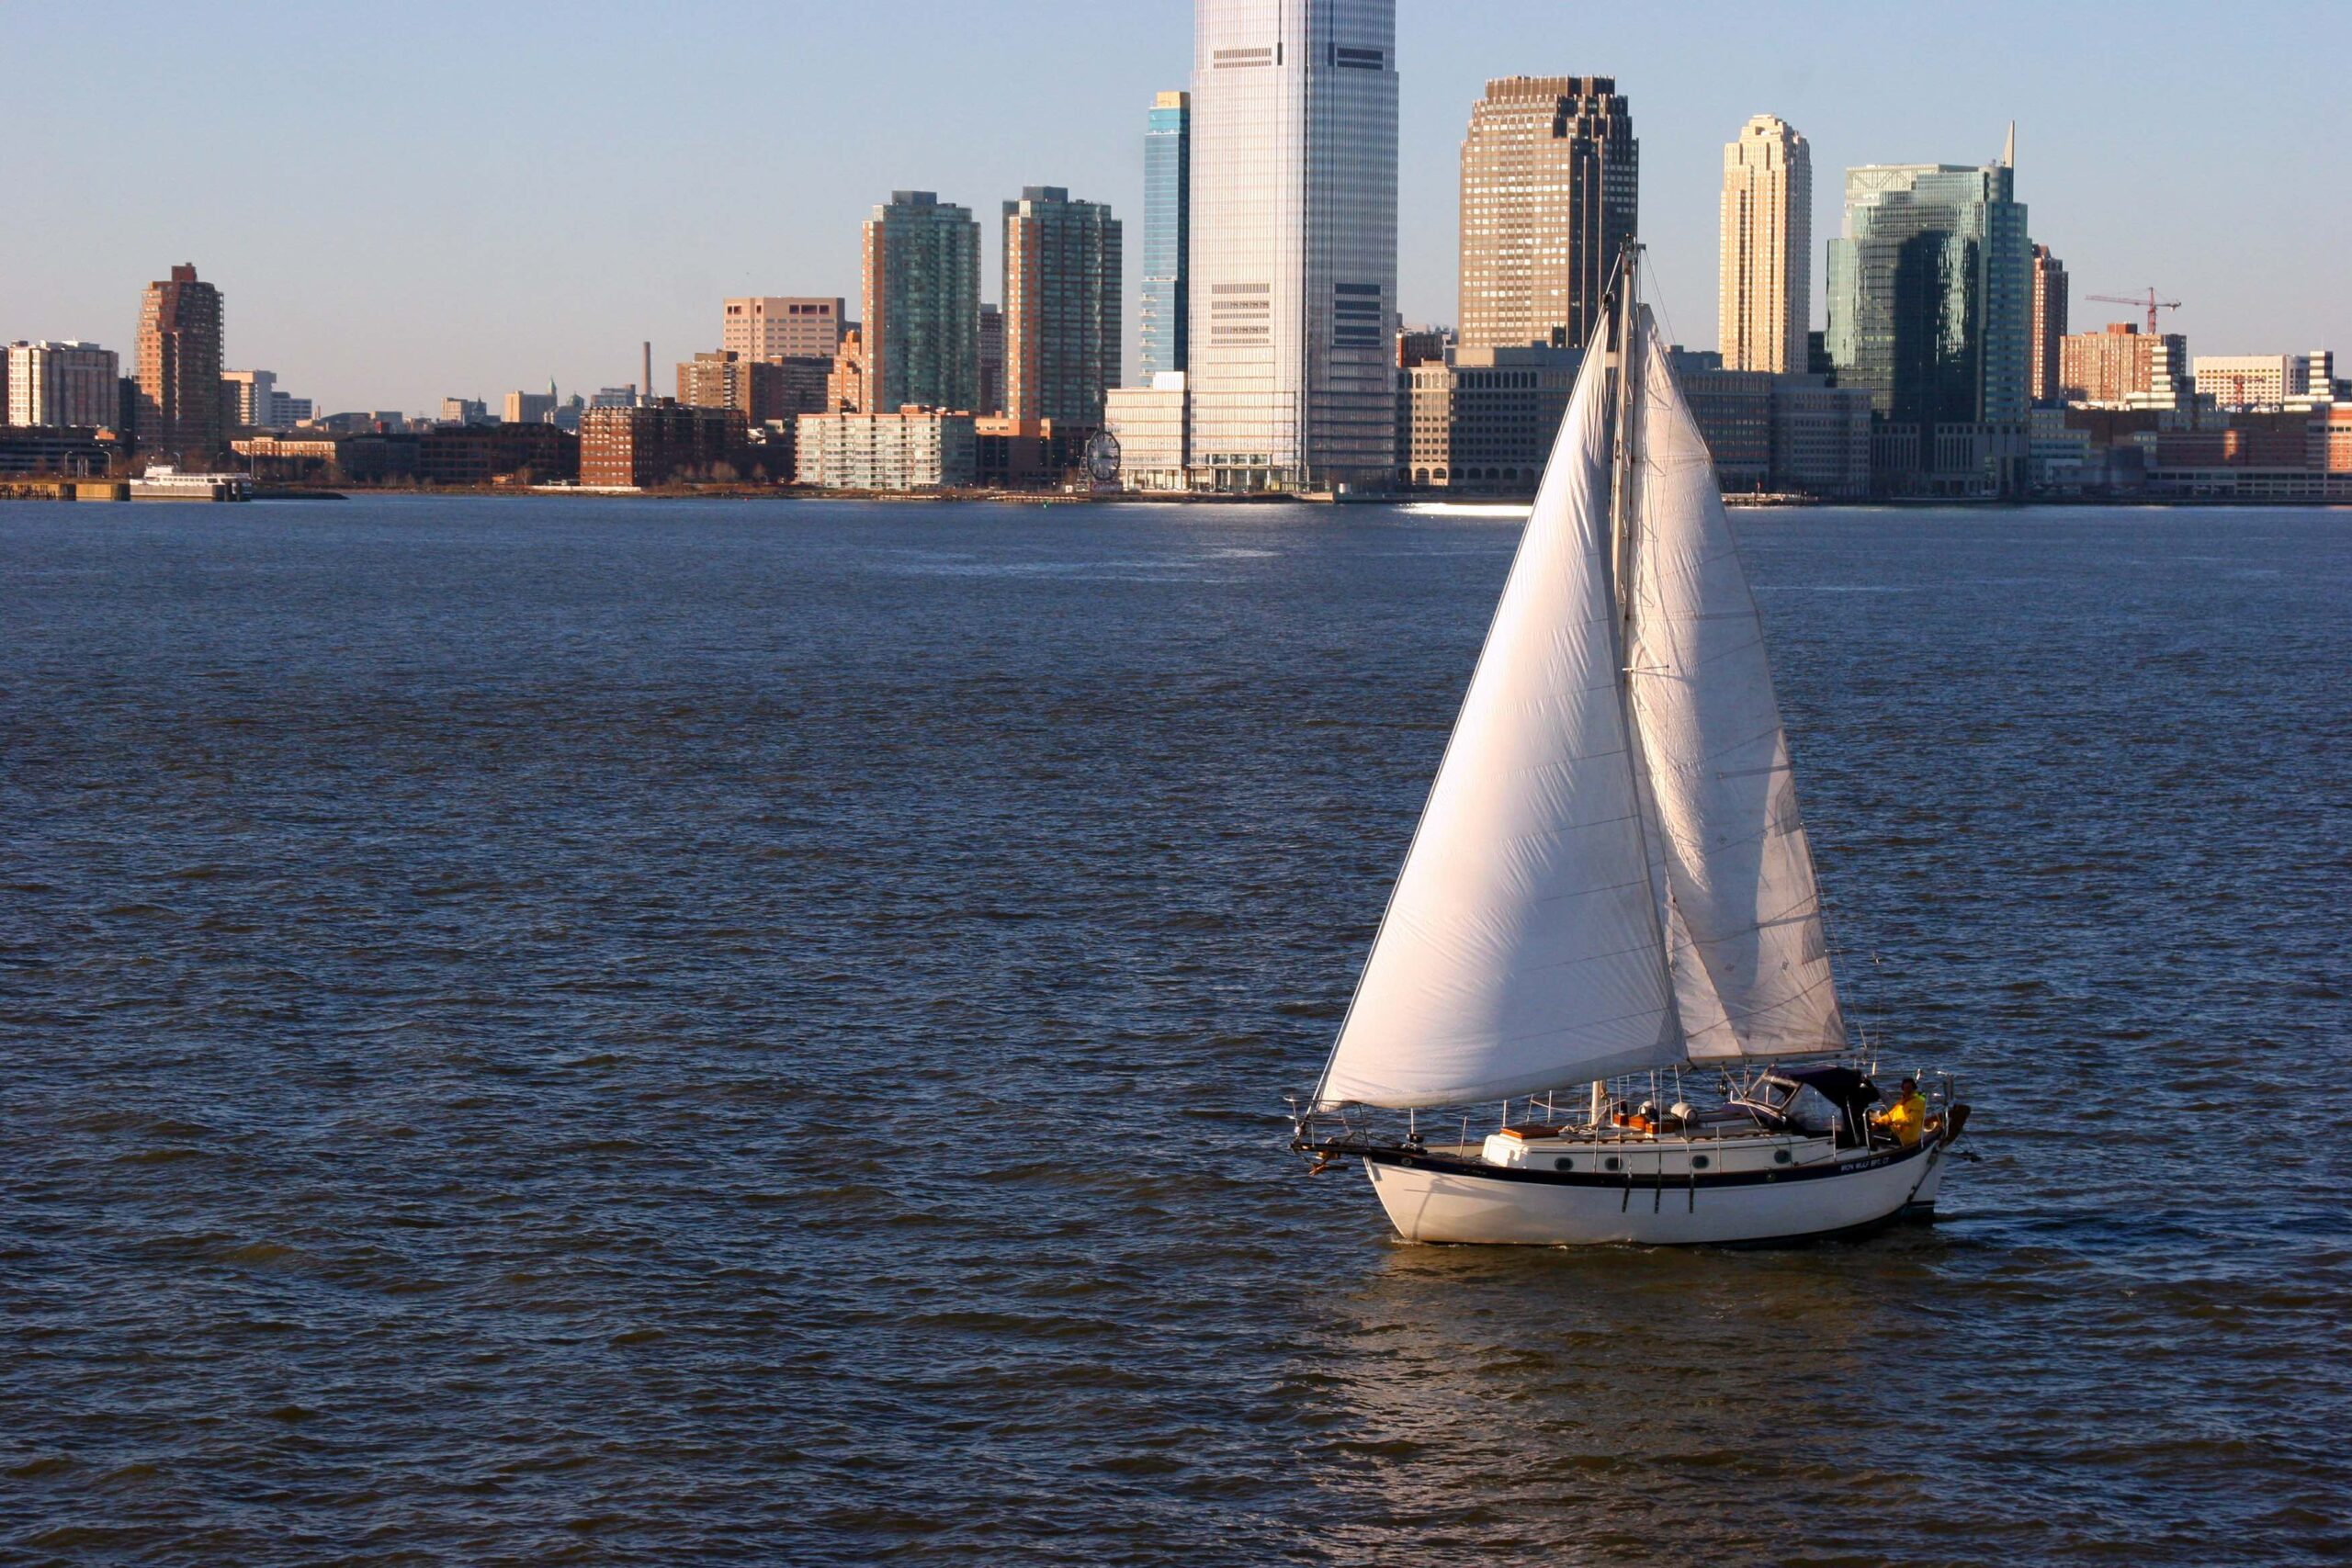 A boat in the Hudson River and buildings of New York City in the USA during daytime